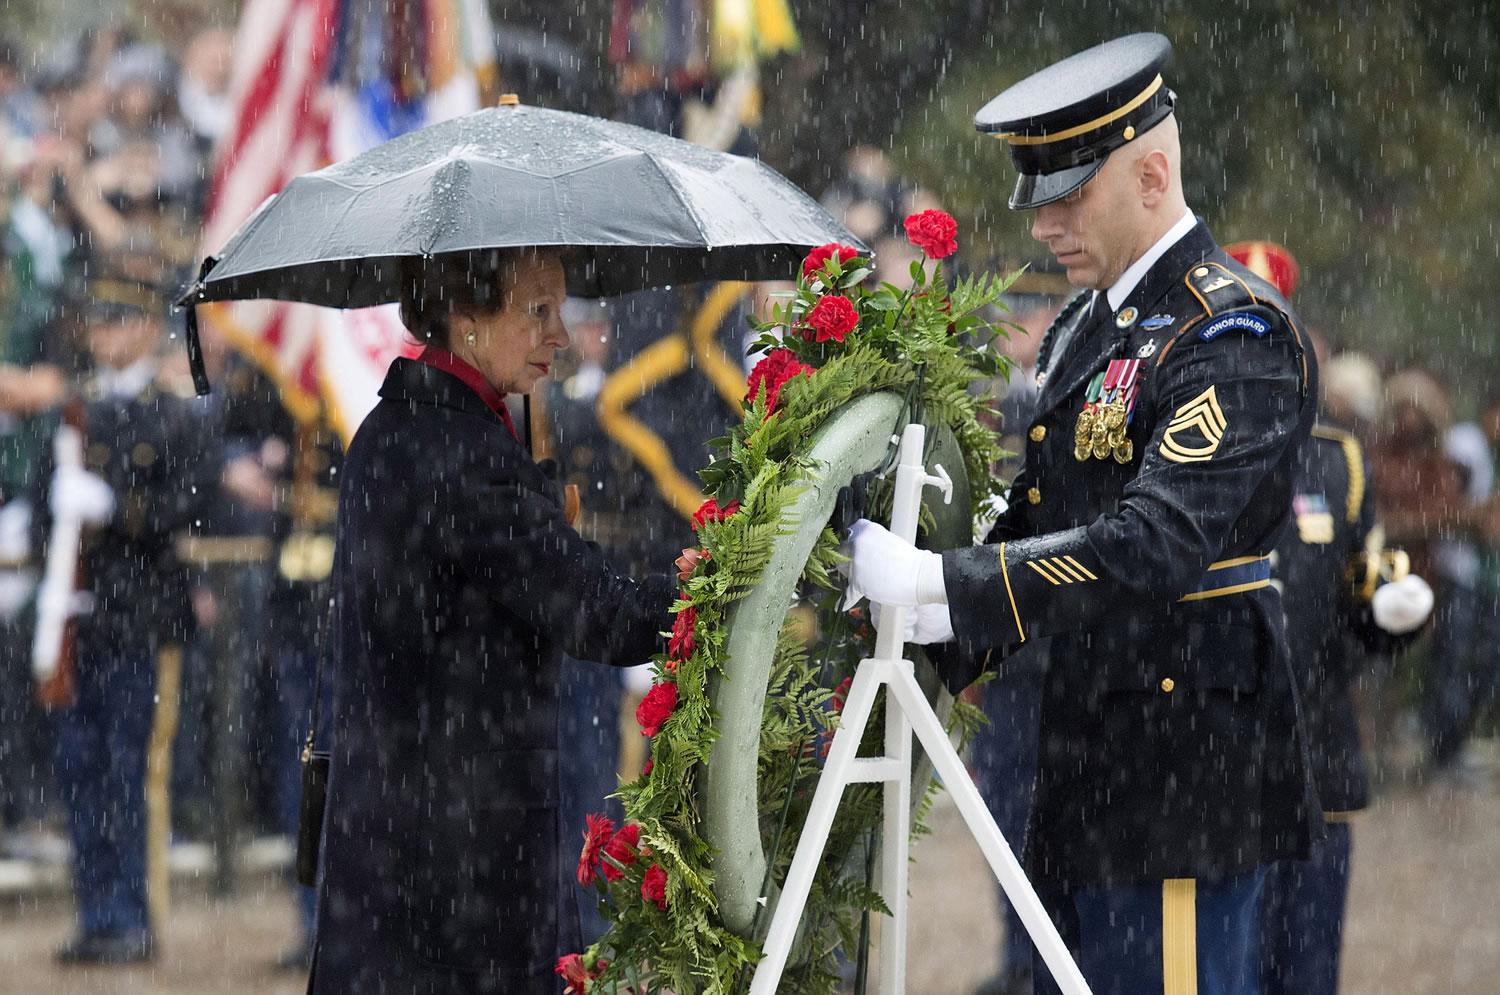 Britain's Princess Anne takes part in a wreath-laying ceremony Thursday at the Tomb of the Unknowns at Arlington National Cemetery in Arlington, Va.